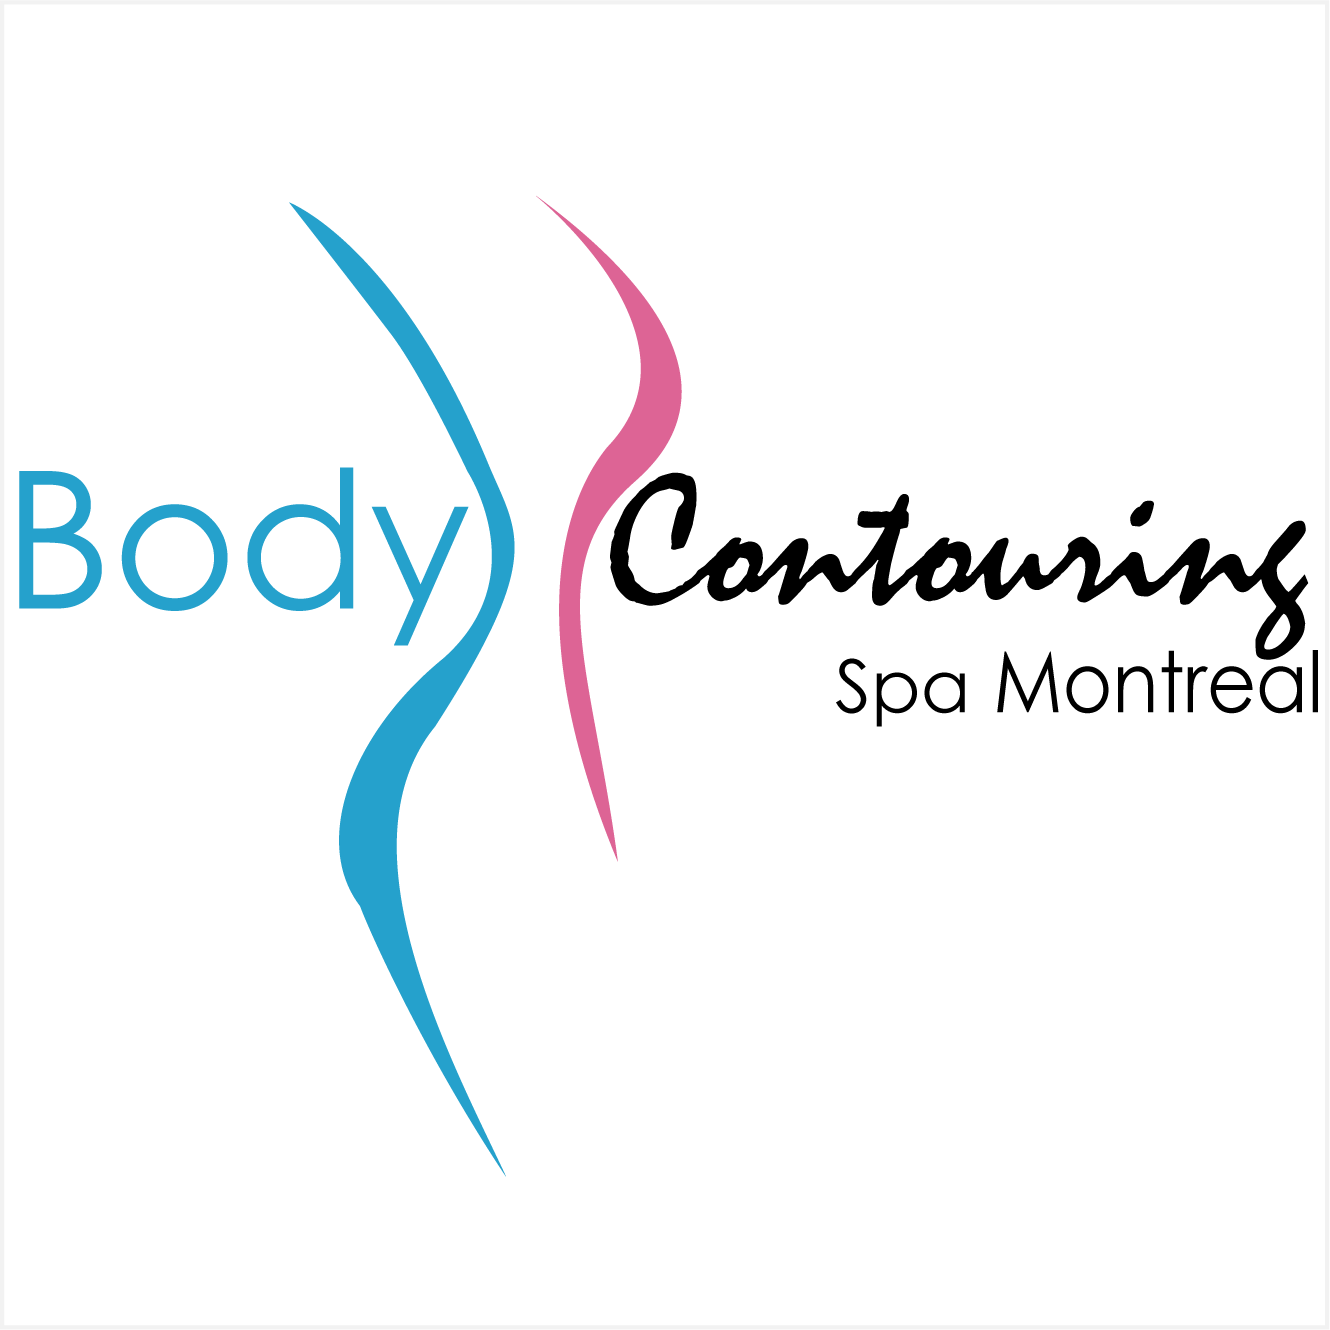 Spa Montreal, Facial Montreal, Massages